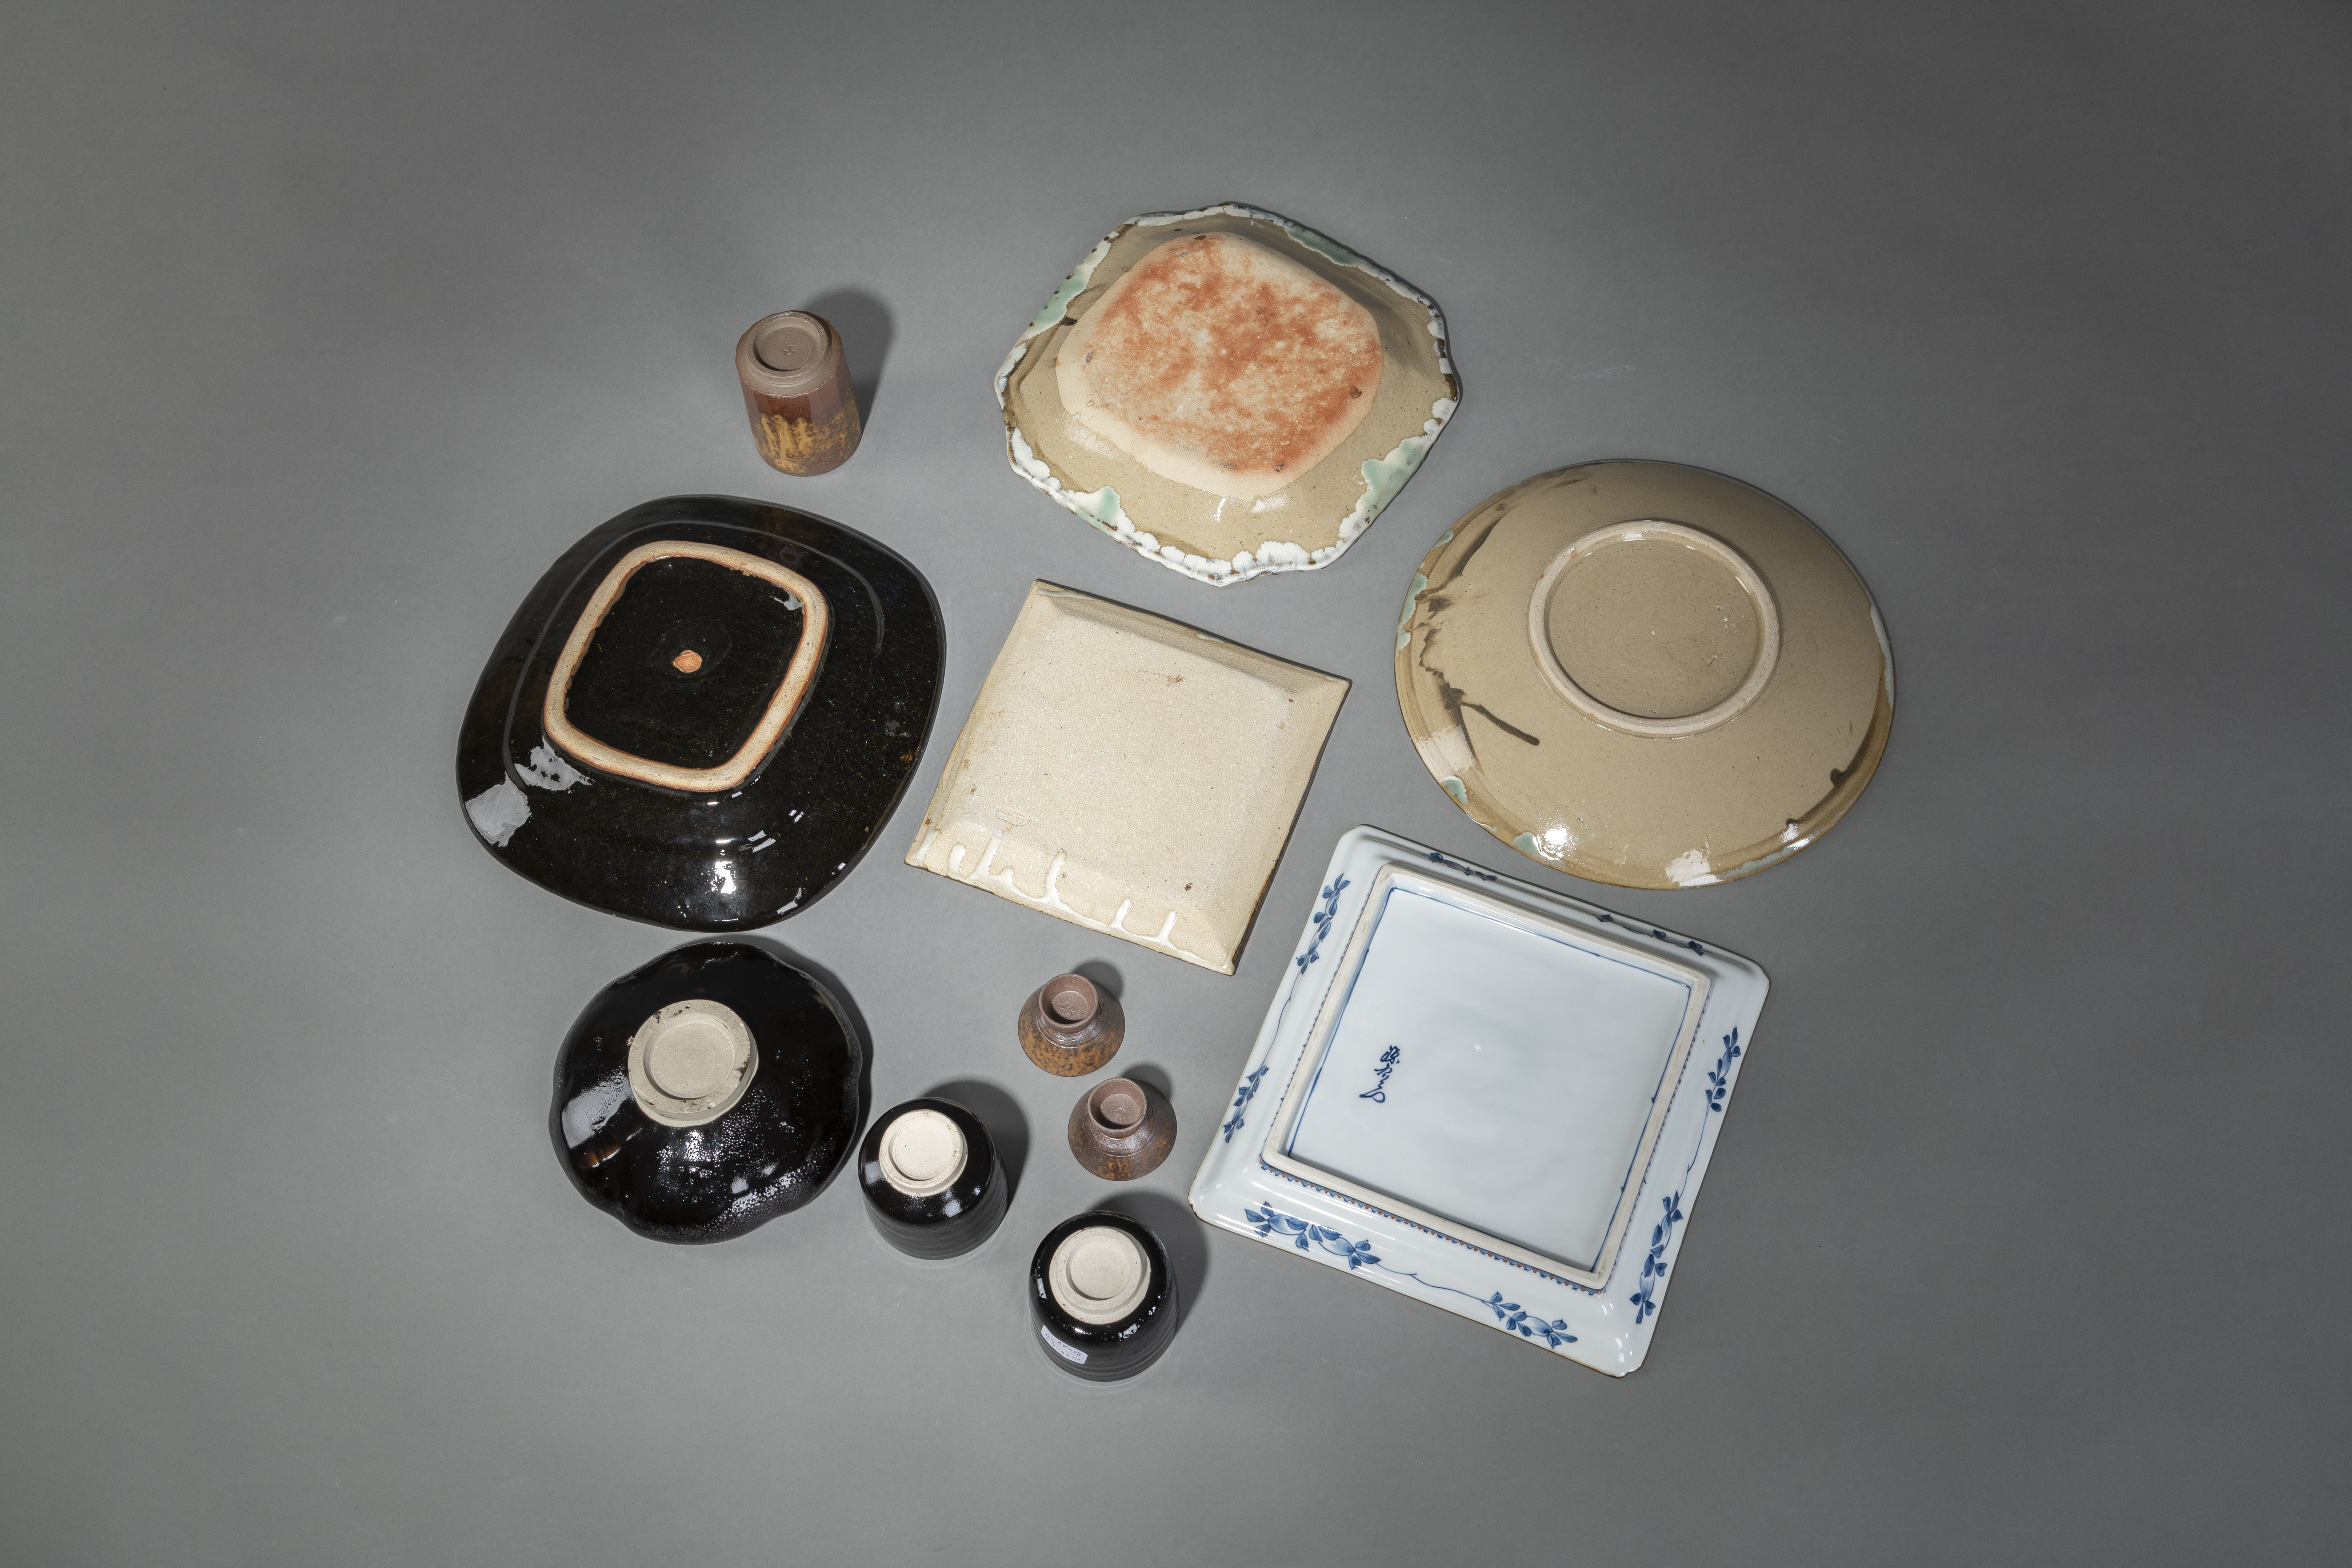 A GROUP OF STUDIO CERAMICS: TWO SQUARE AND THREE ROUND PLATES, A TEA BOWL, THREE TEA CUPS AND A PAI - Image 3 of 3